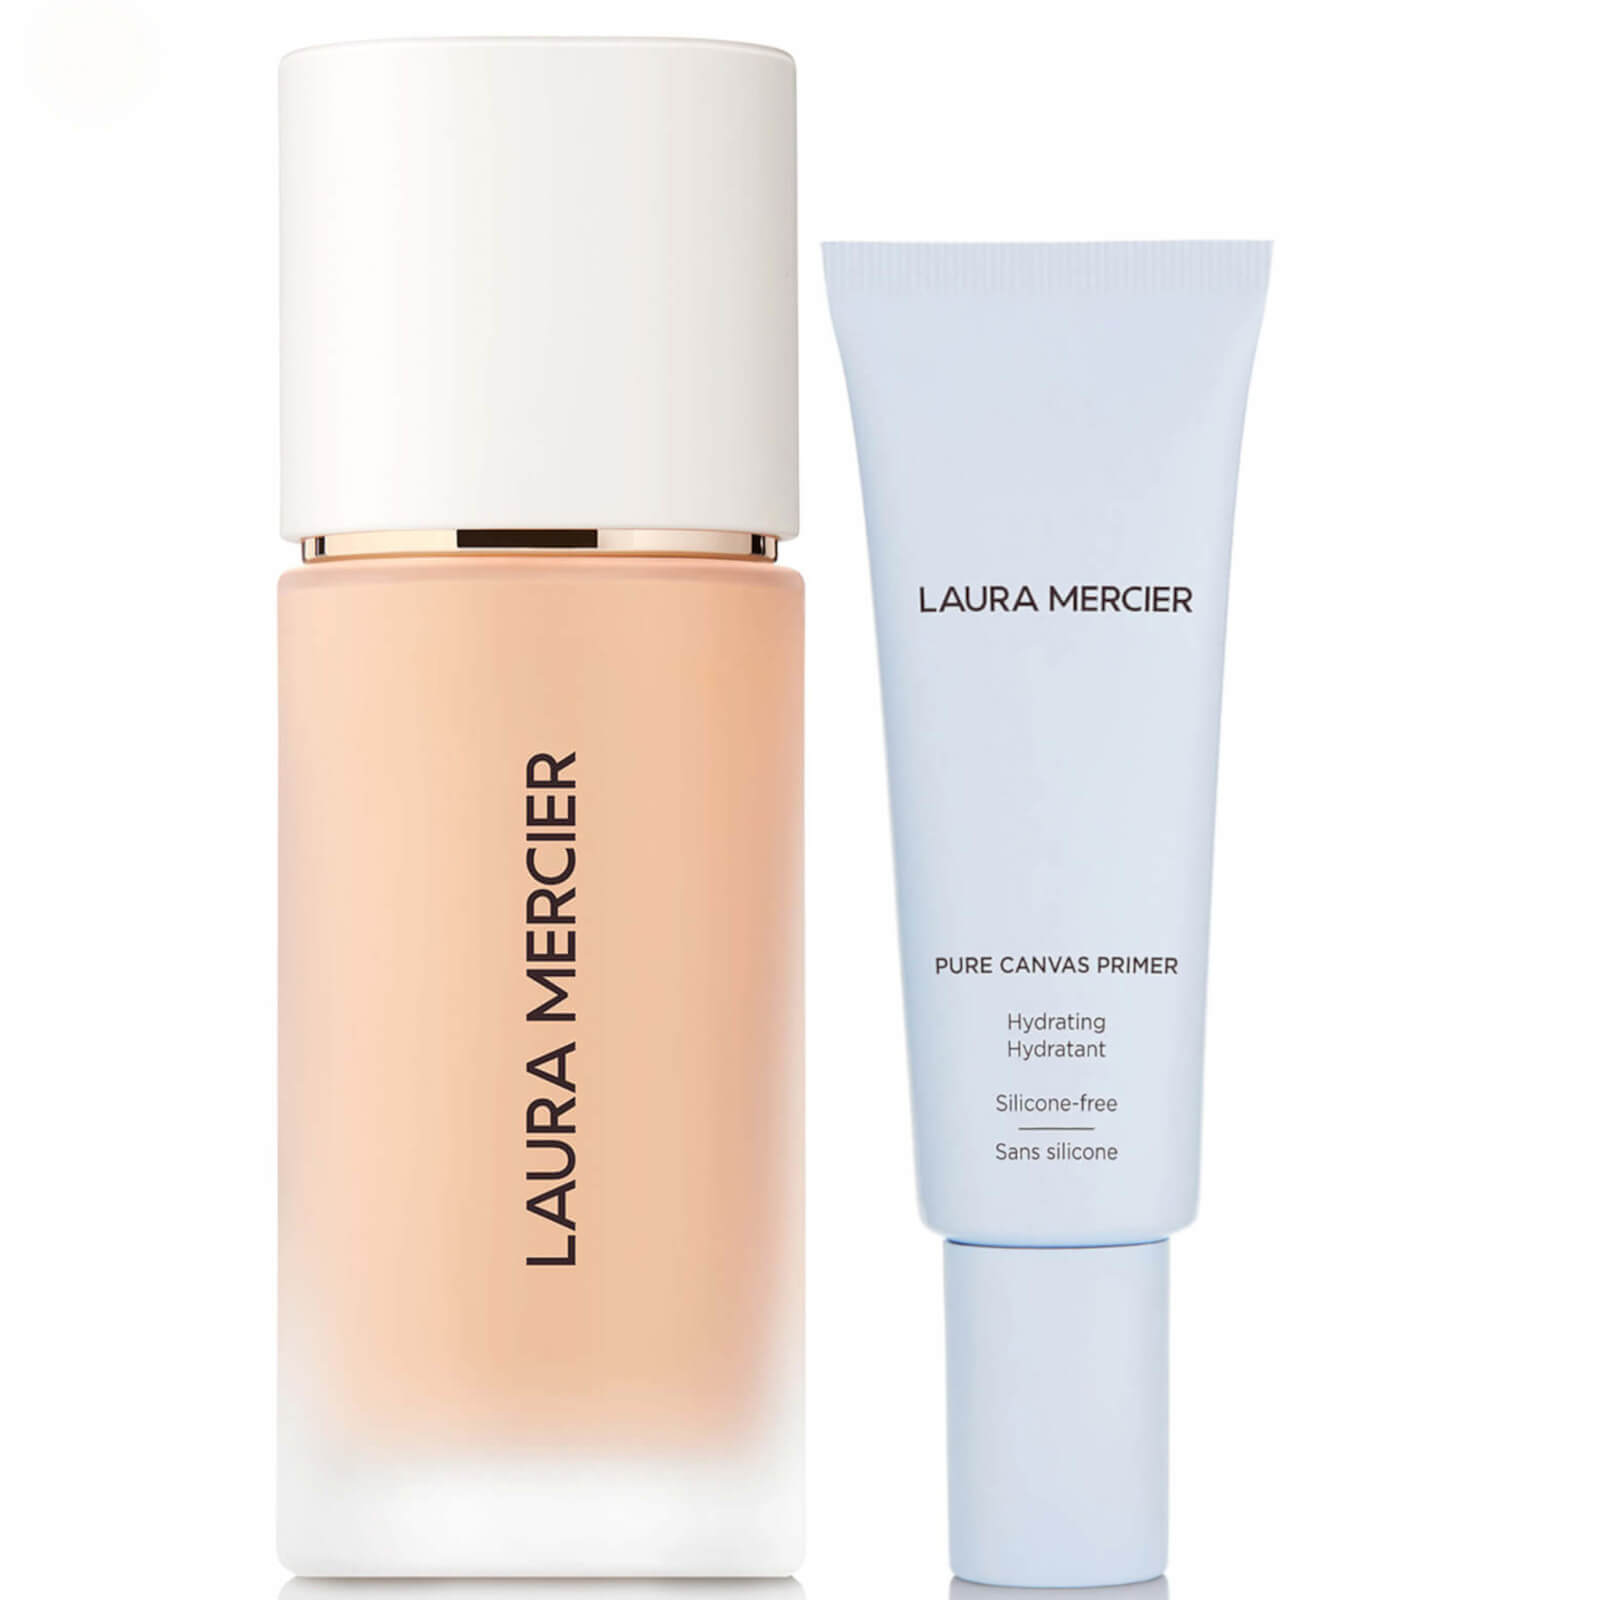 Laura Mercier Real Flawless Foundation and Pure Canvas Hydrating Primer Bundle (Various Shades) - Ch